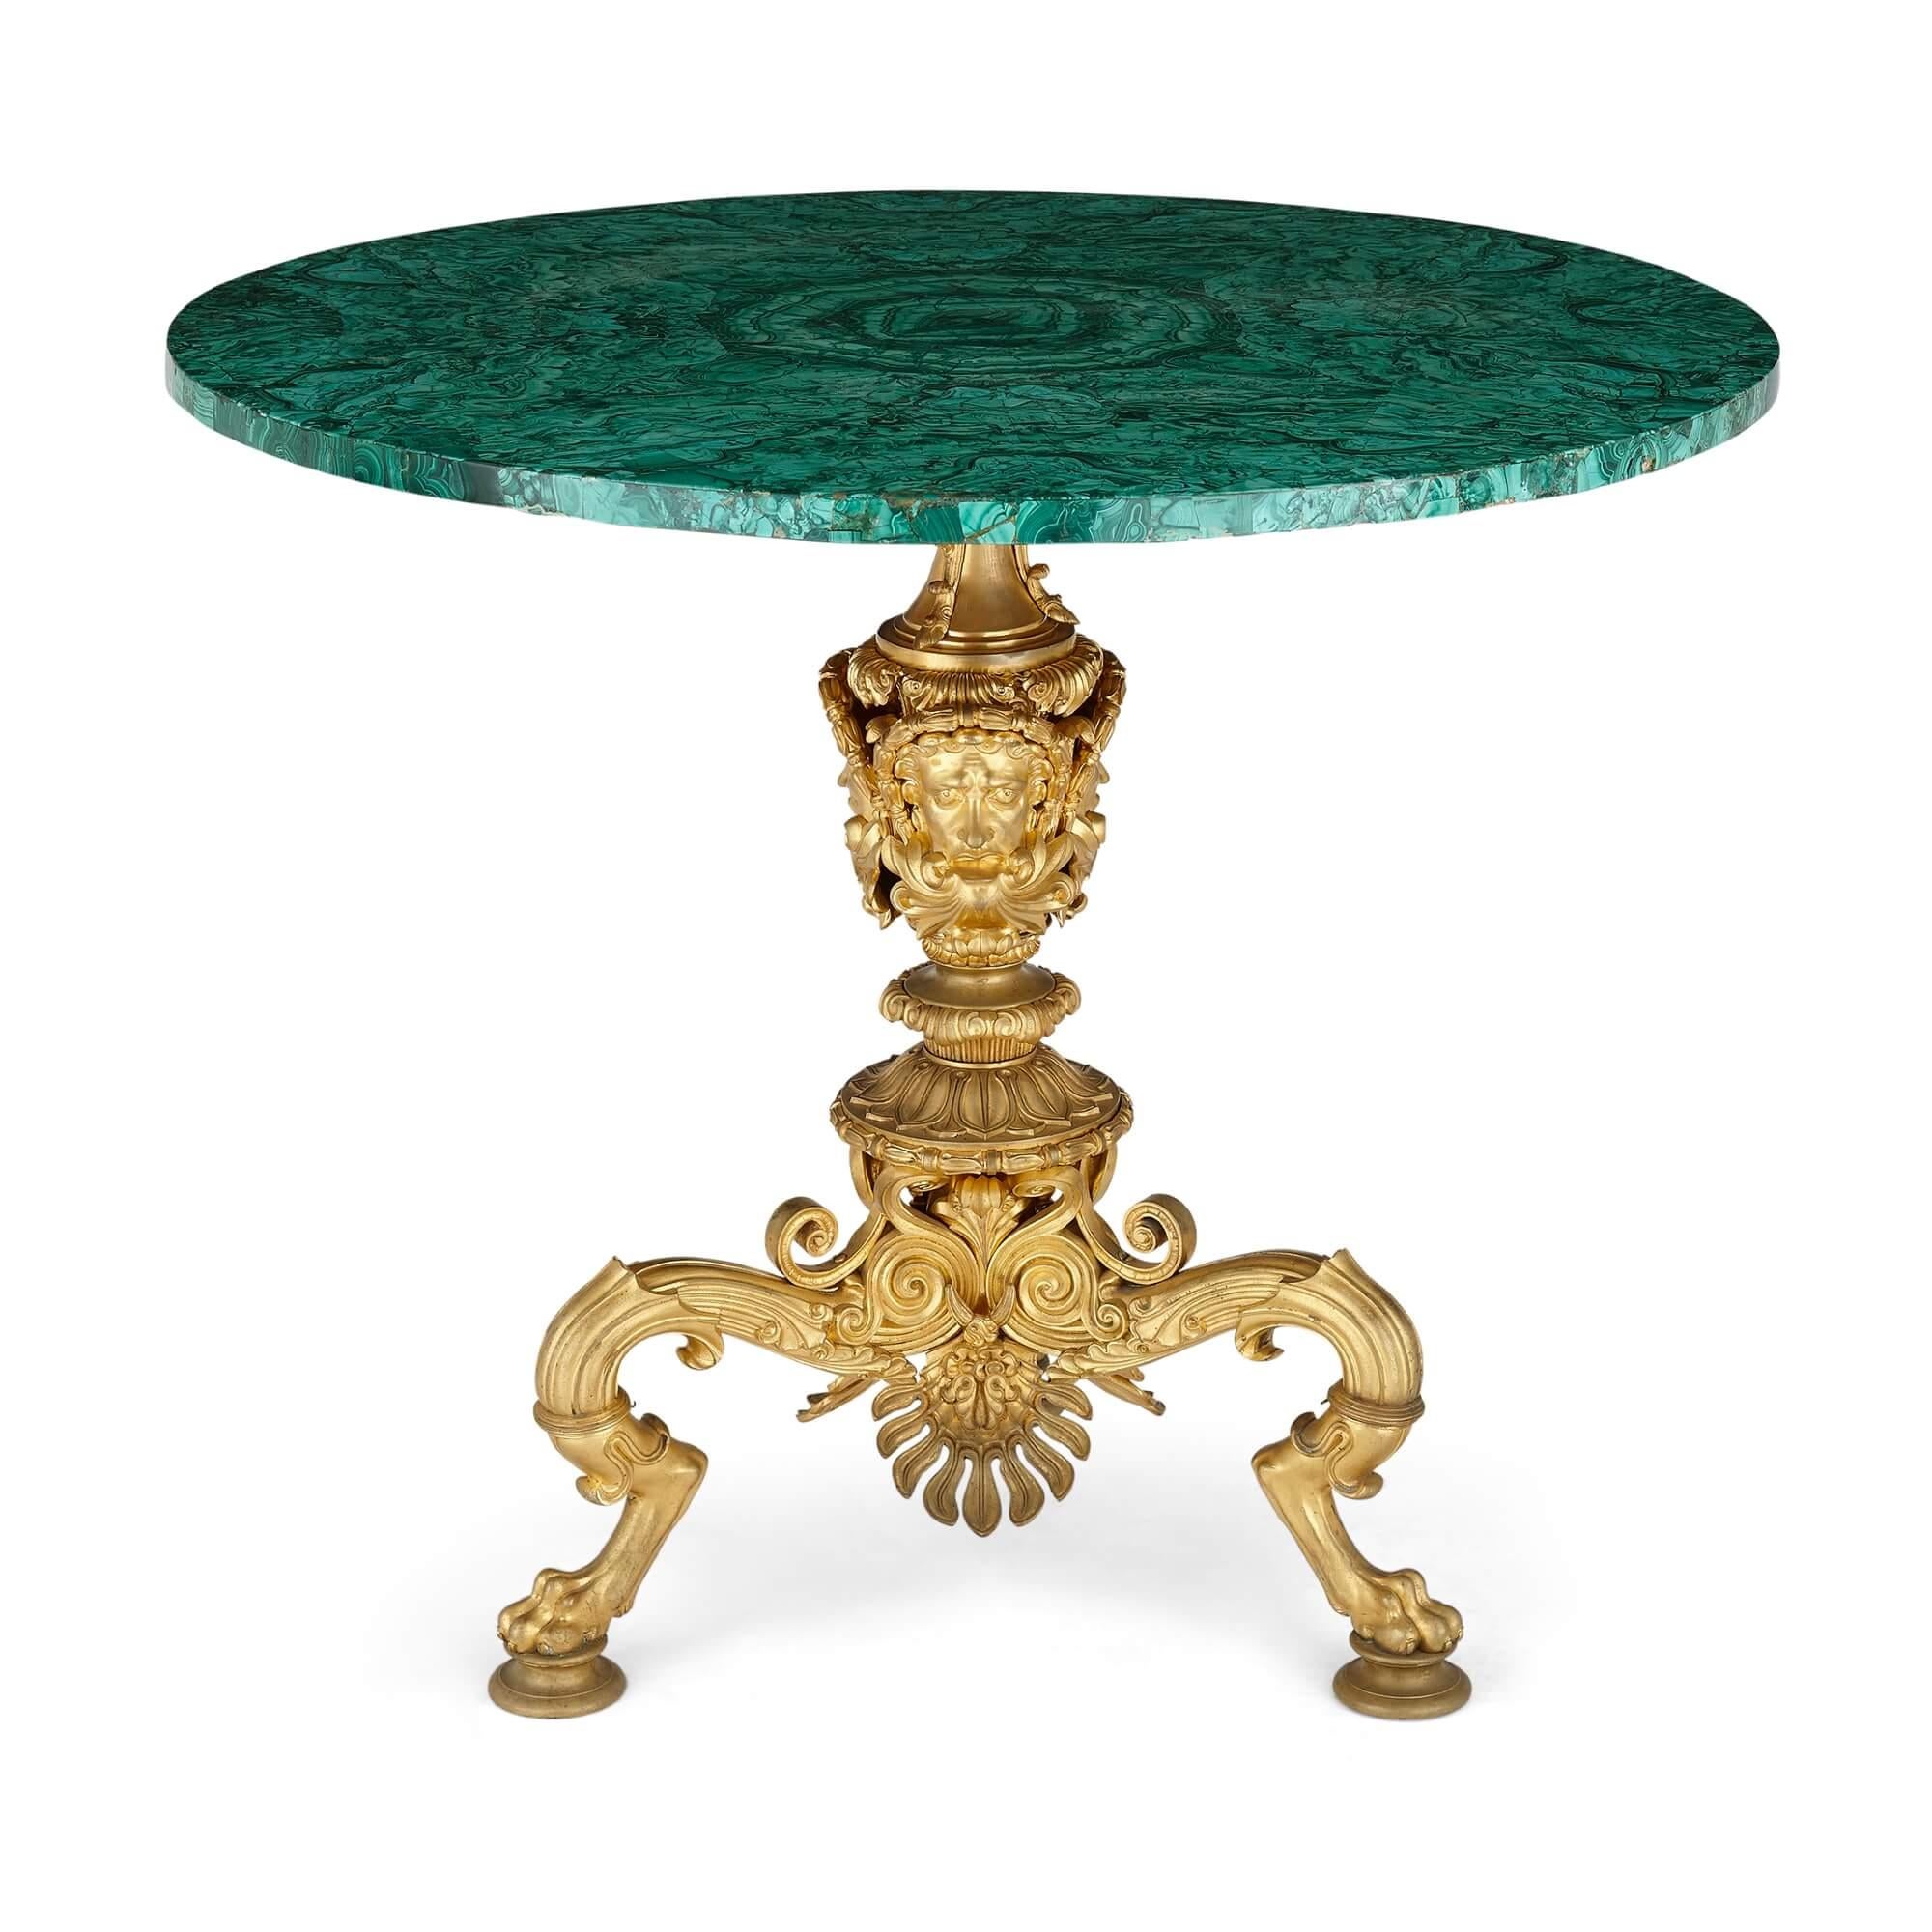 Nicholas I period Russian malachite side table with gilt bronze base
Russian c. 1840
Measures: Height 77cm, diameter 89cm

This is a truly exceptional piece, representing some of the most extravagant craftsmanship of the early 19th Century in